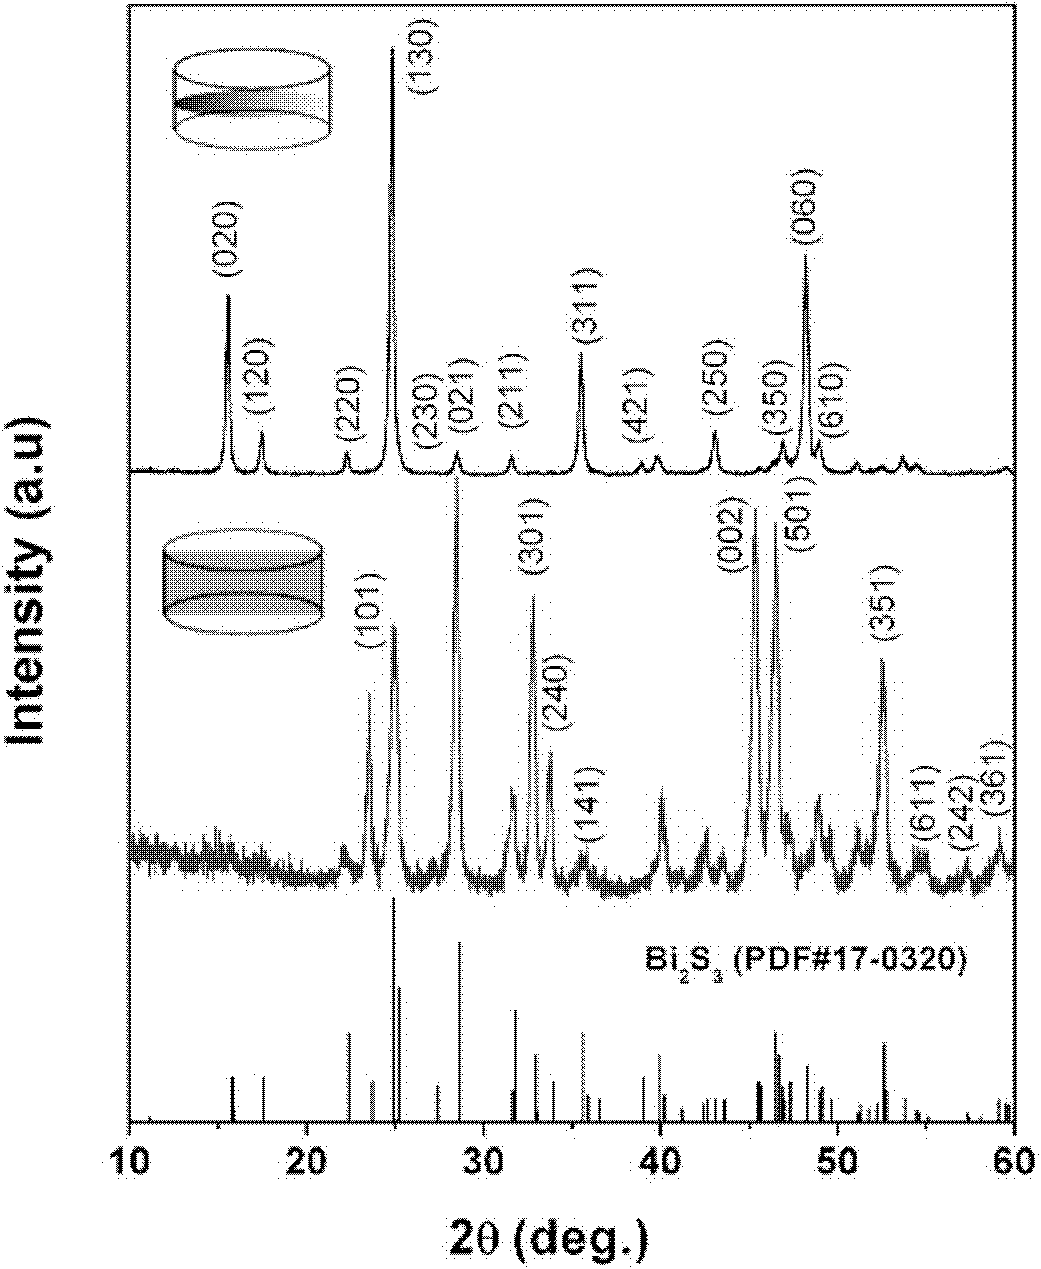 Method for preparing polycrystalline textured thermoelectric material from single-crystal bismuth sulfide precursor powder